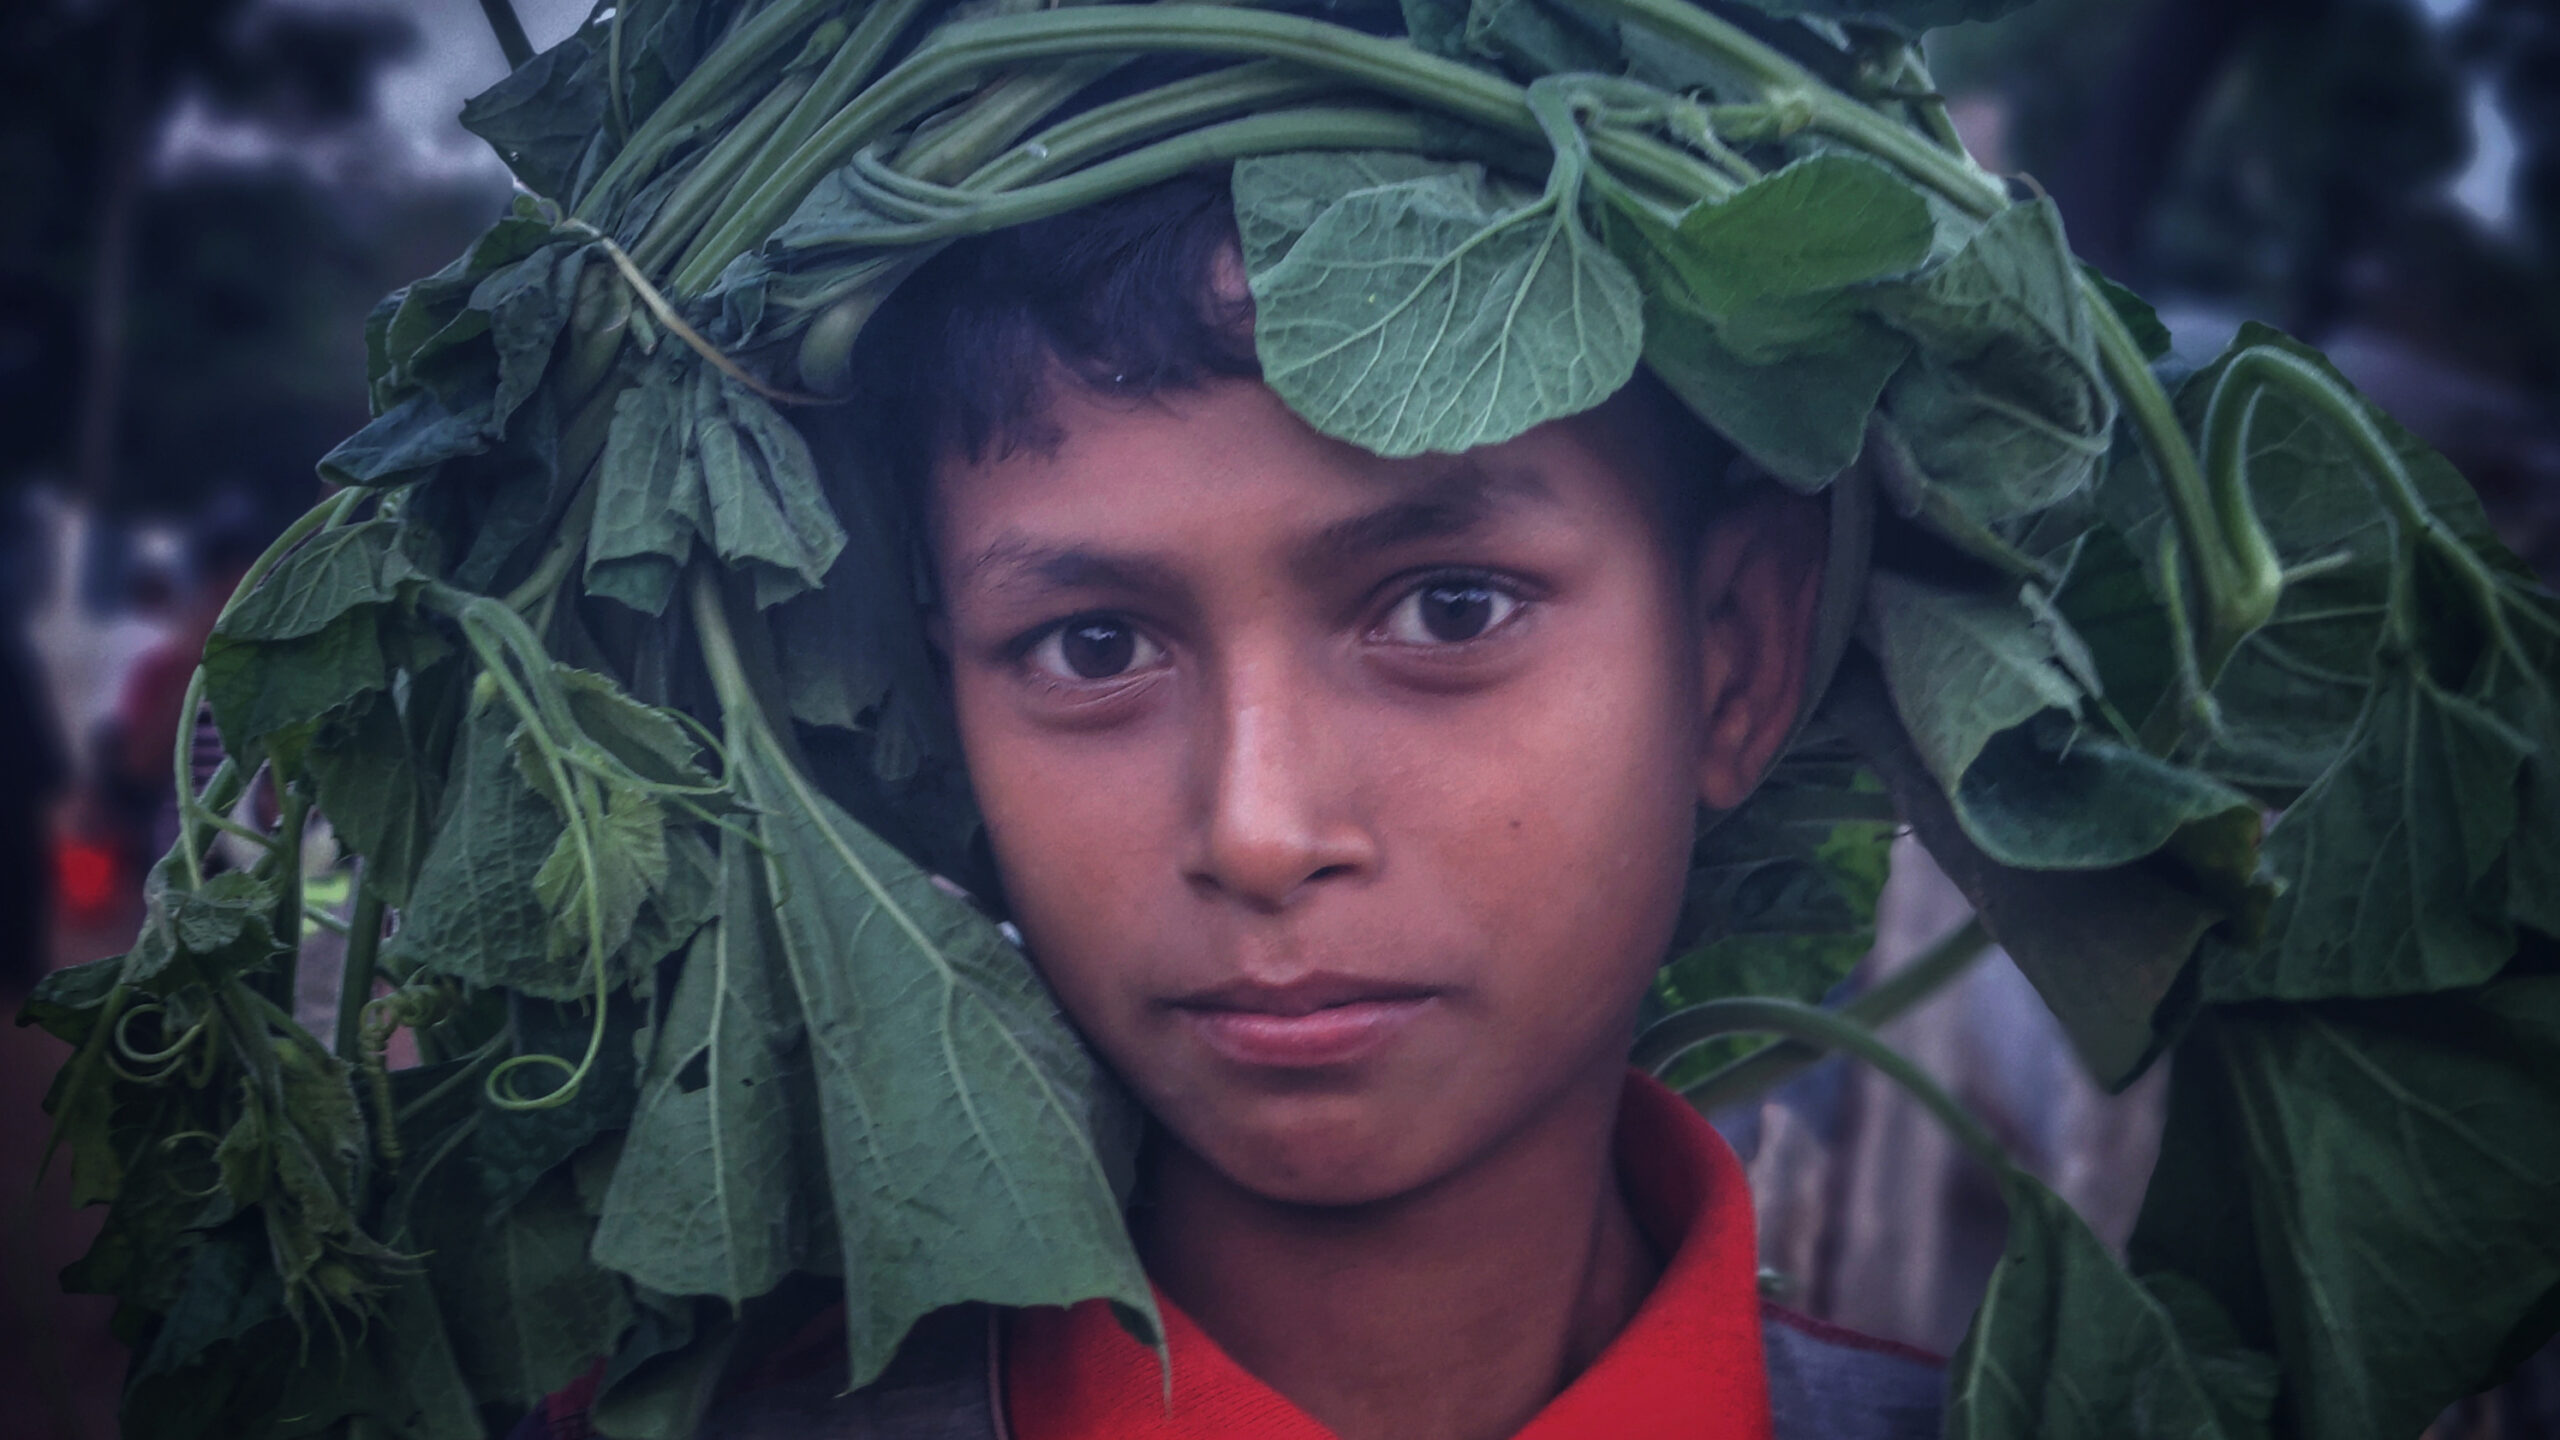 Arfat Ahmed, age 10, photographed on Nov. 8, 2022 as he returns to his family's dwelling with gourd leaves to cook for